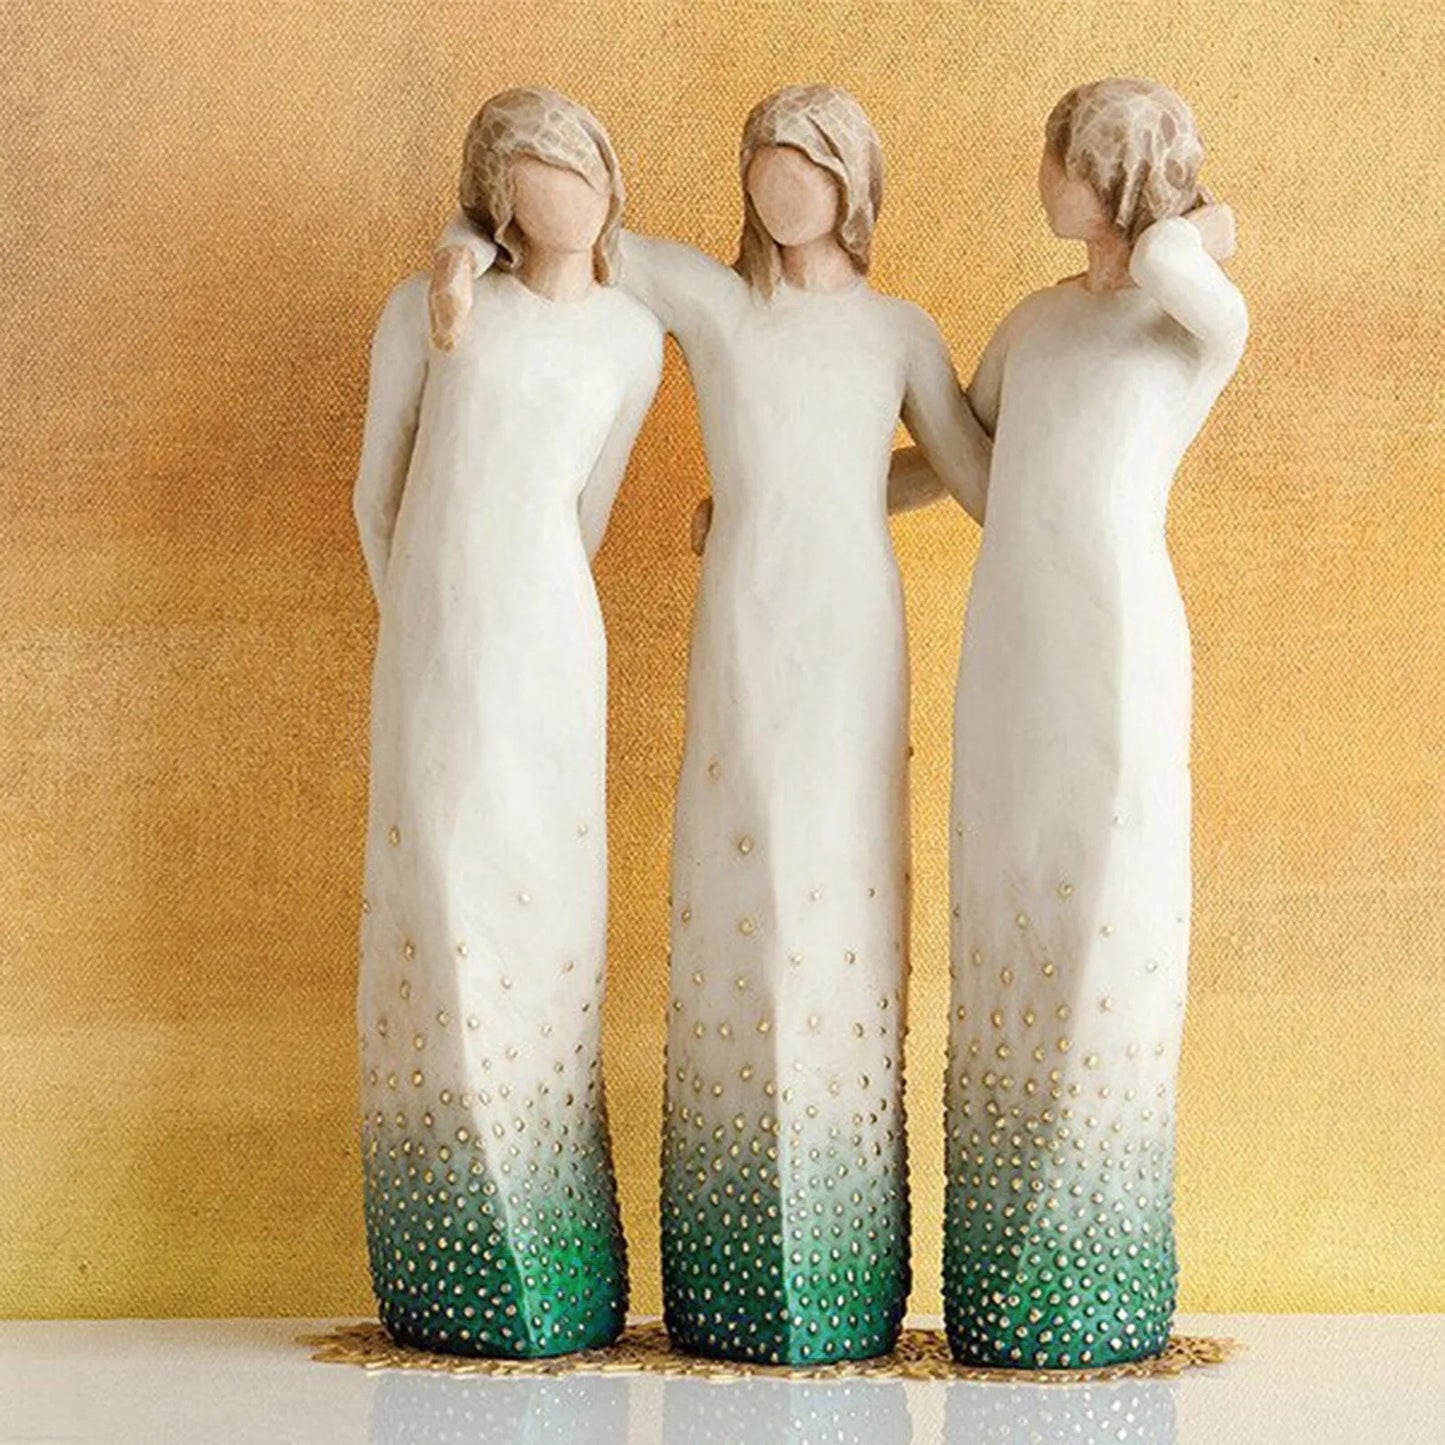 Figurines For Interior Statue Home Decoration Willow Tree Three Sisters Figure By My Side Sculpture Resin Xmas Decorative Craft